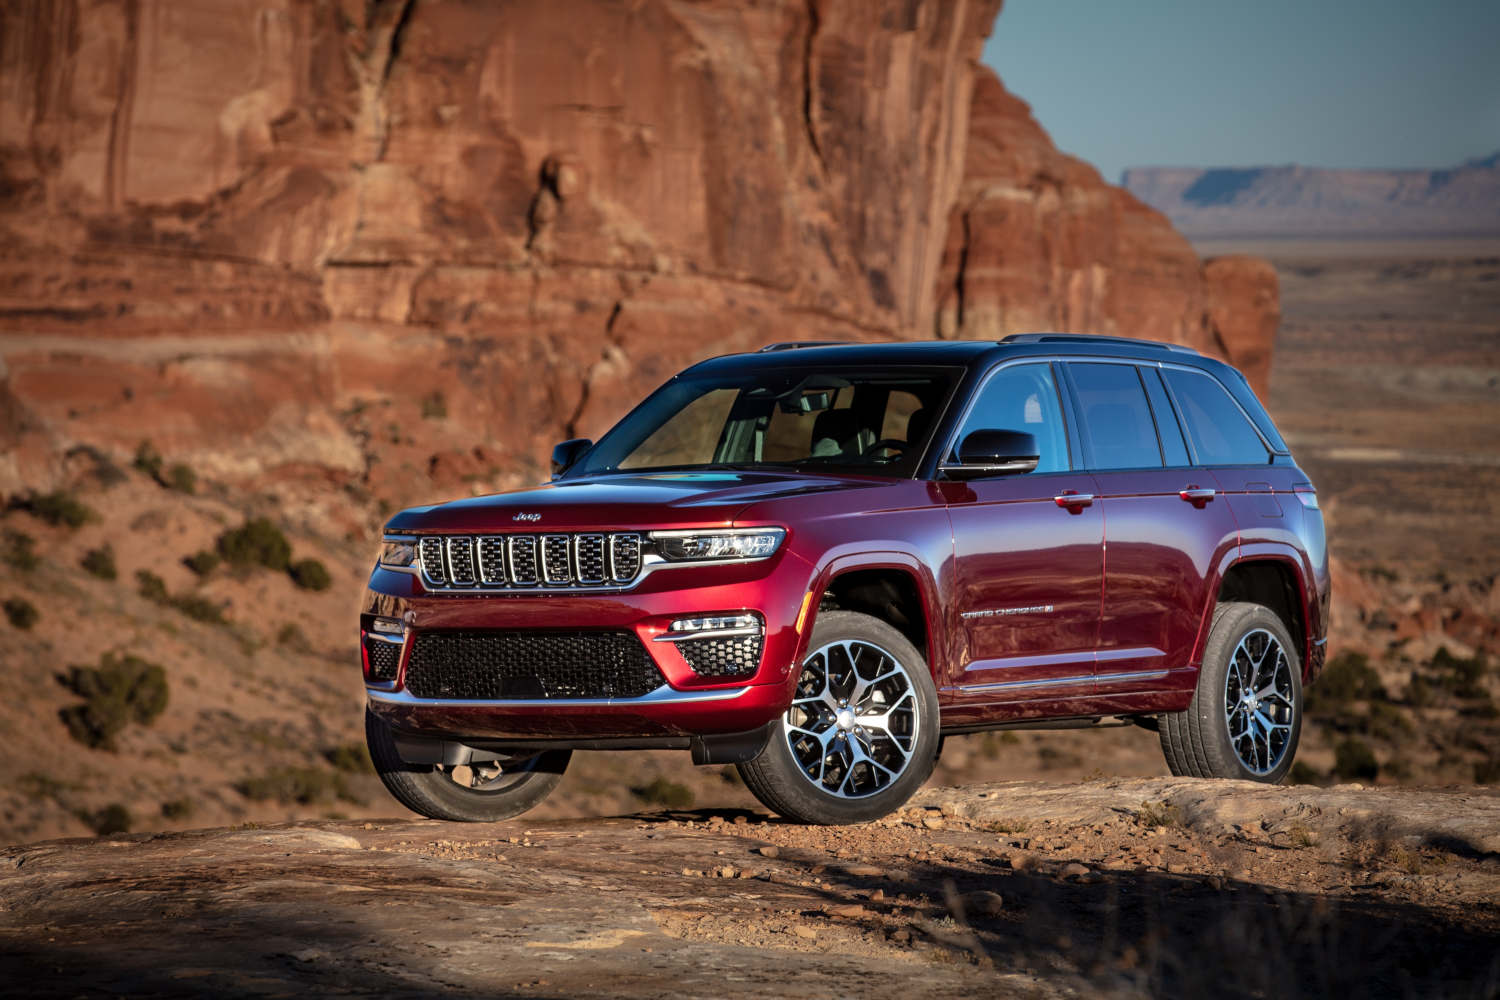 This Jeep SUV is the 2023 Grand Cherokee